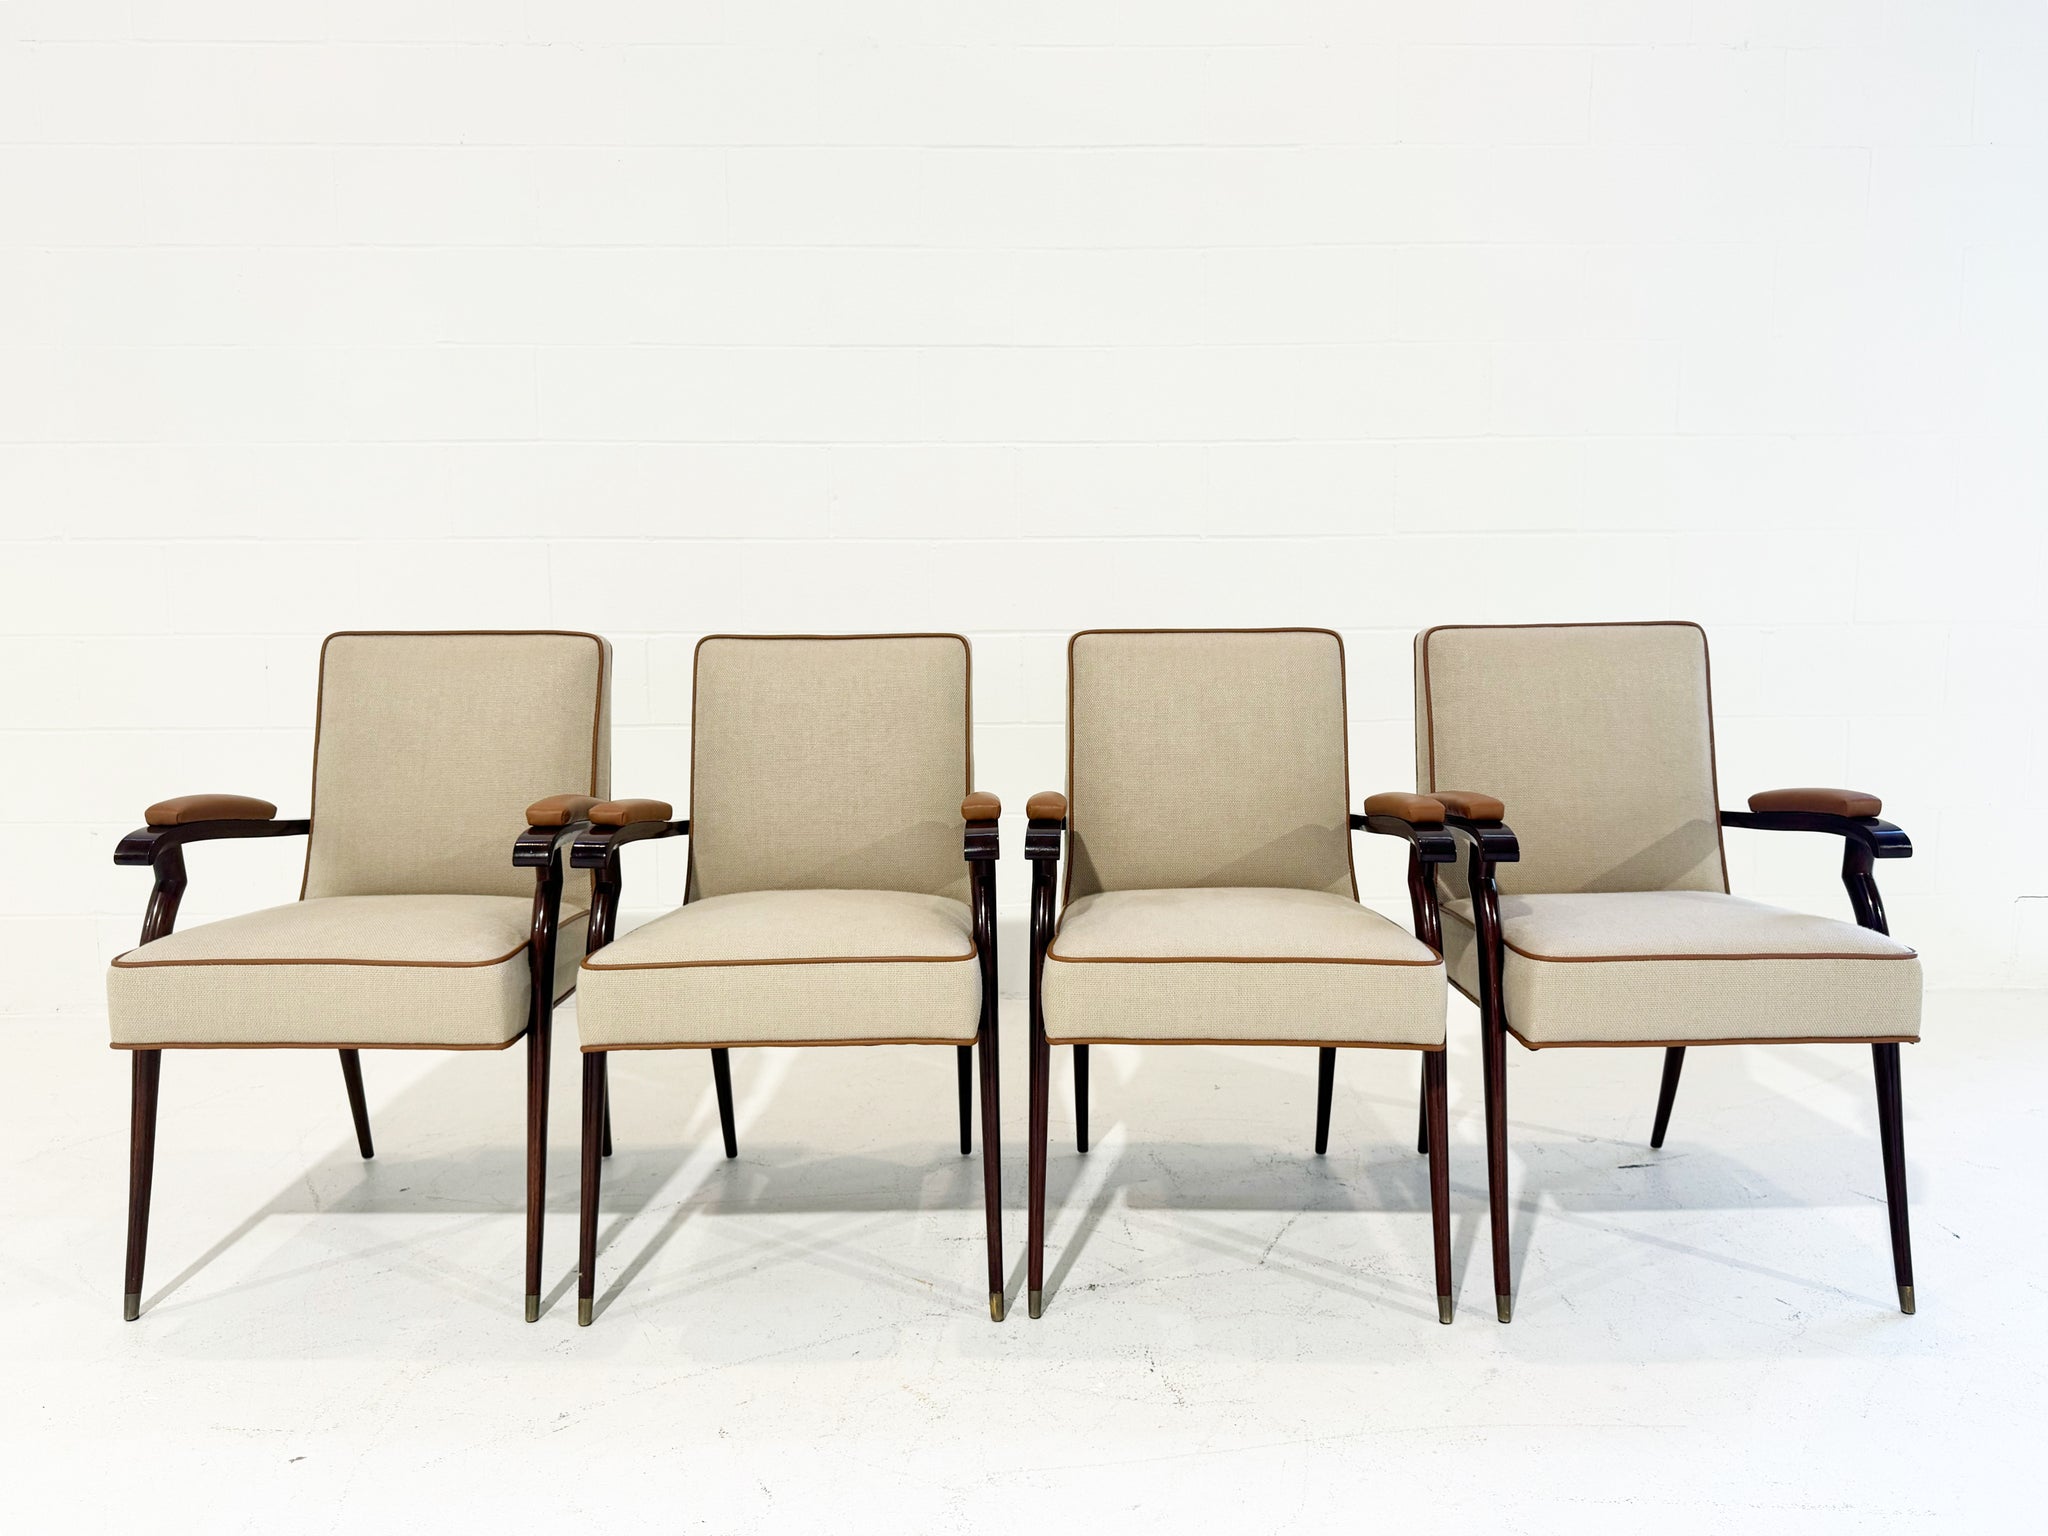 Armchairs in Loro Piana Linen and Leather, Set of 4